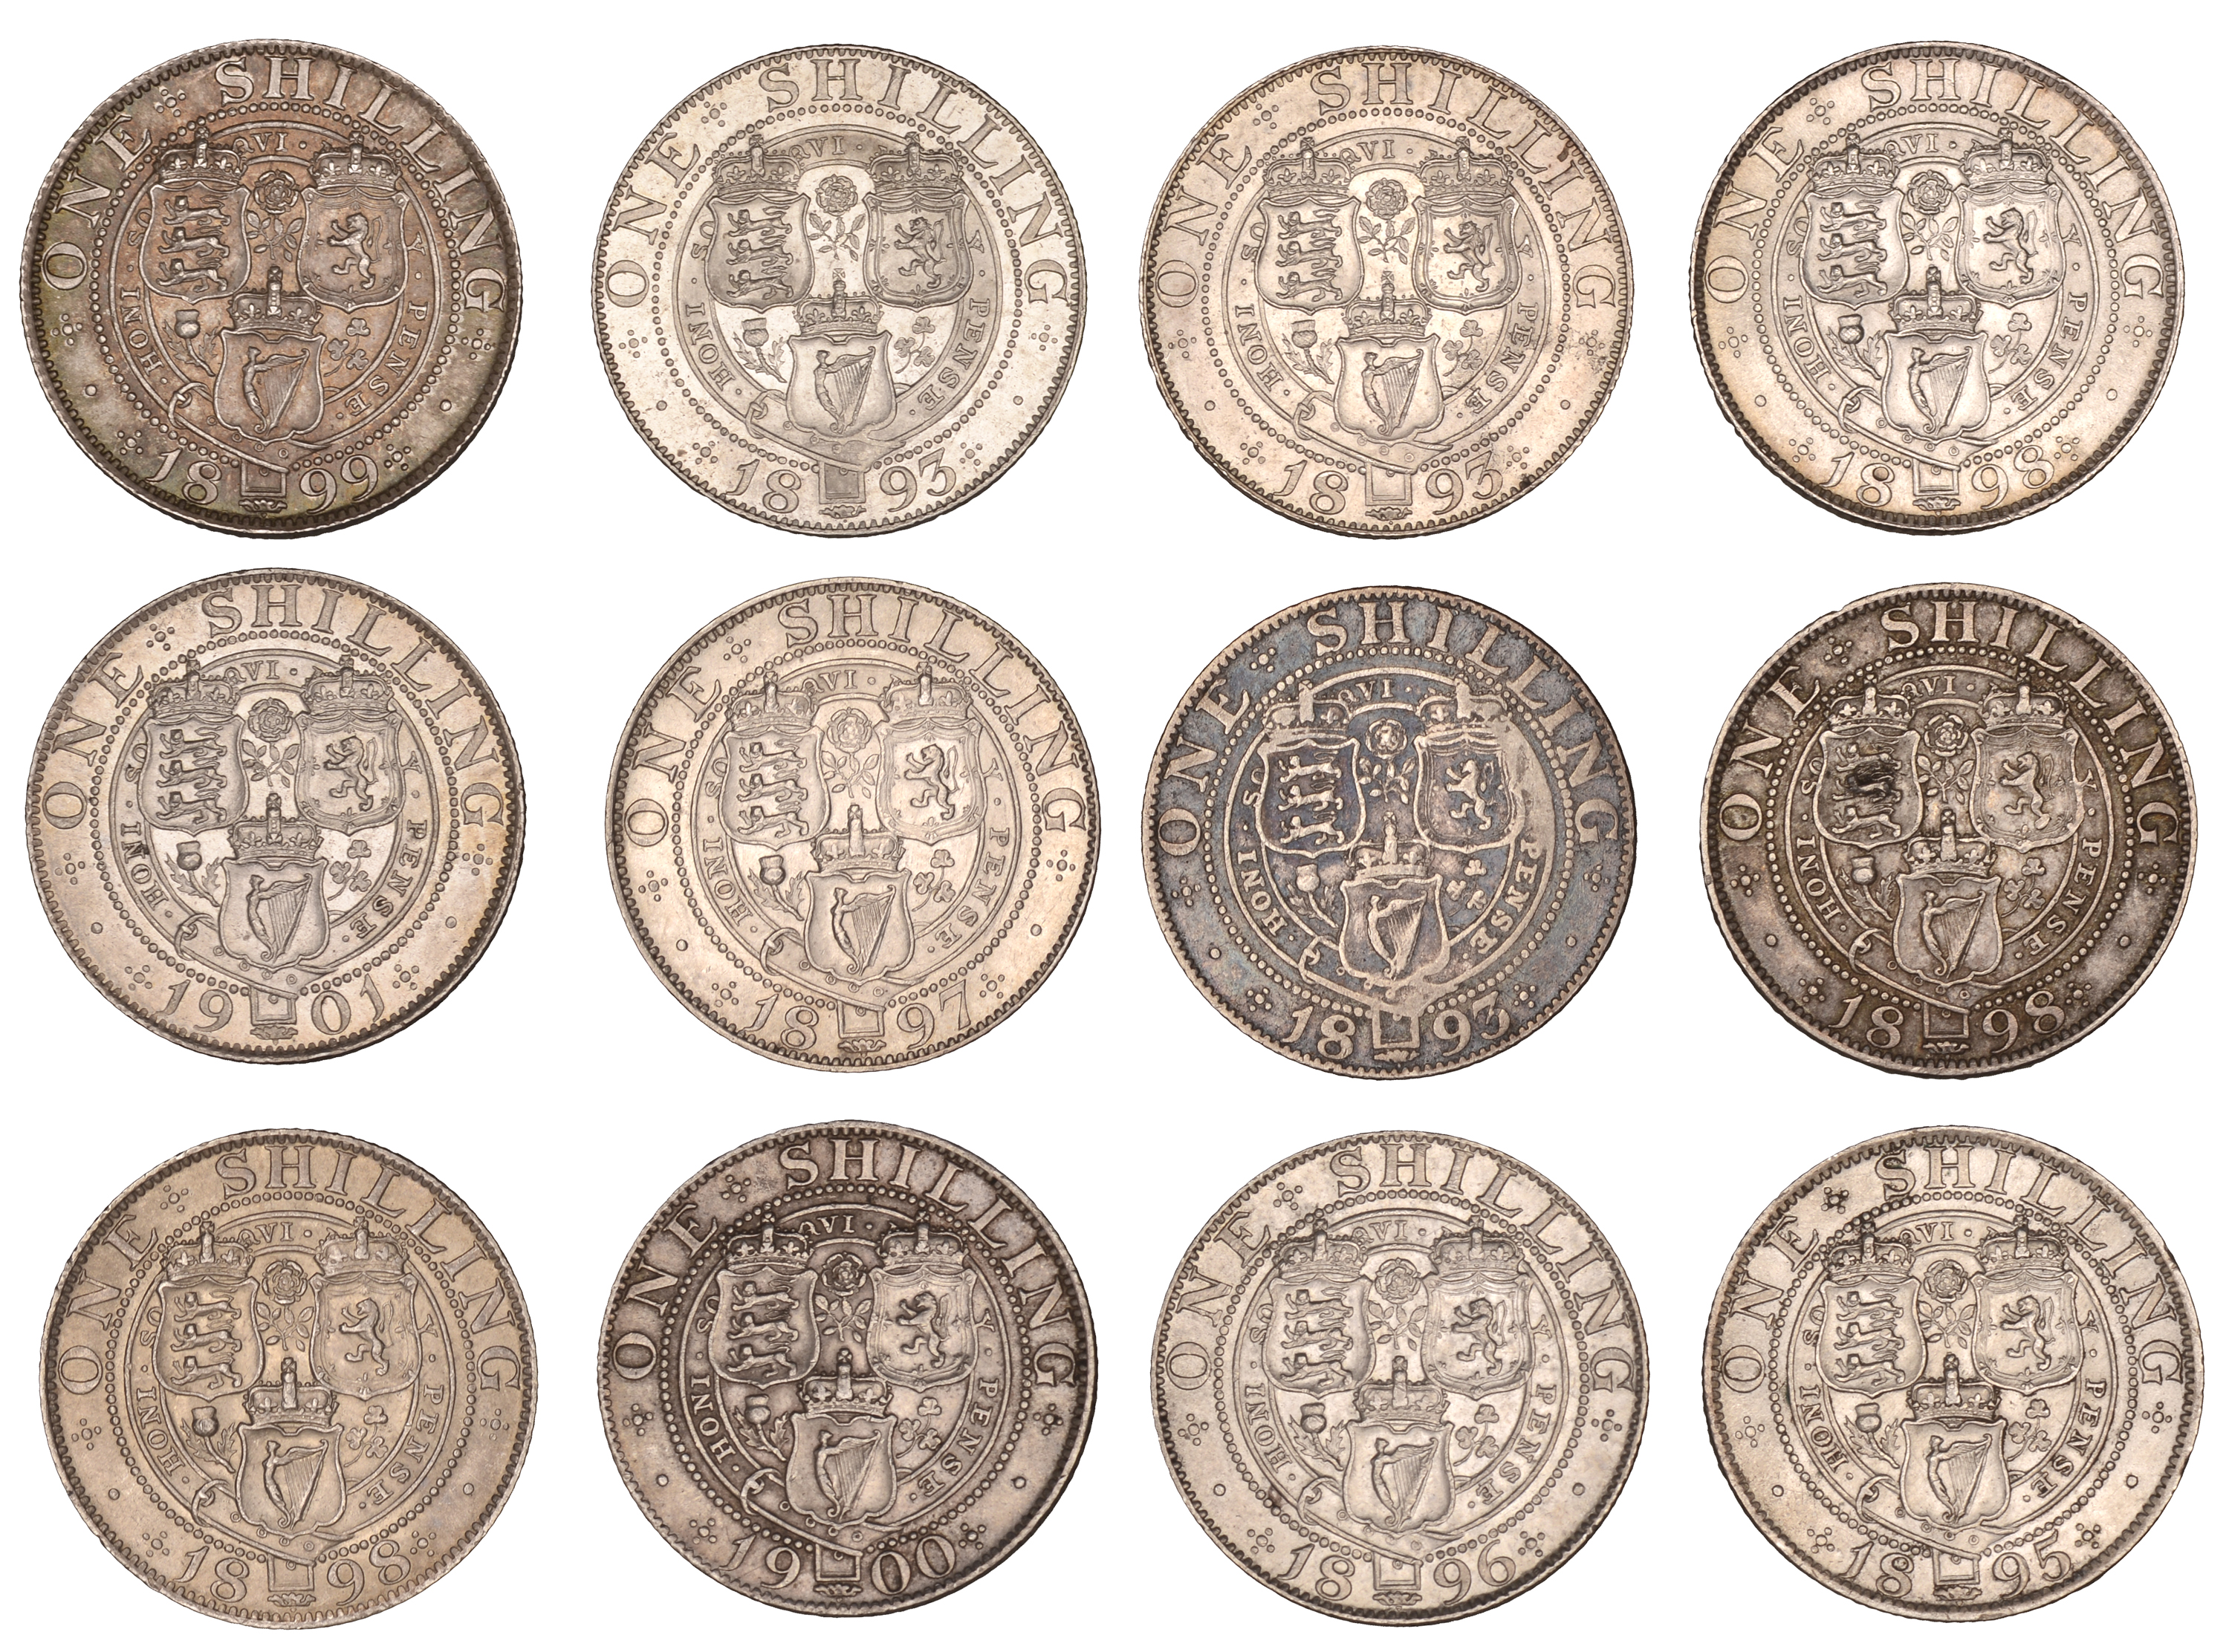 Victoria, Shillings (12), 1893 (3), 1895, 1896, 1897, 1898 (3), 1899, 1900, 1901 (S 3940, 39... - Image 2 of 2